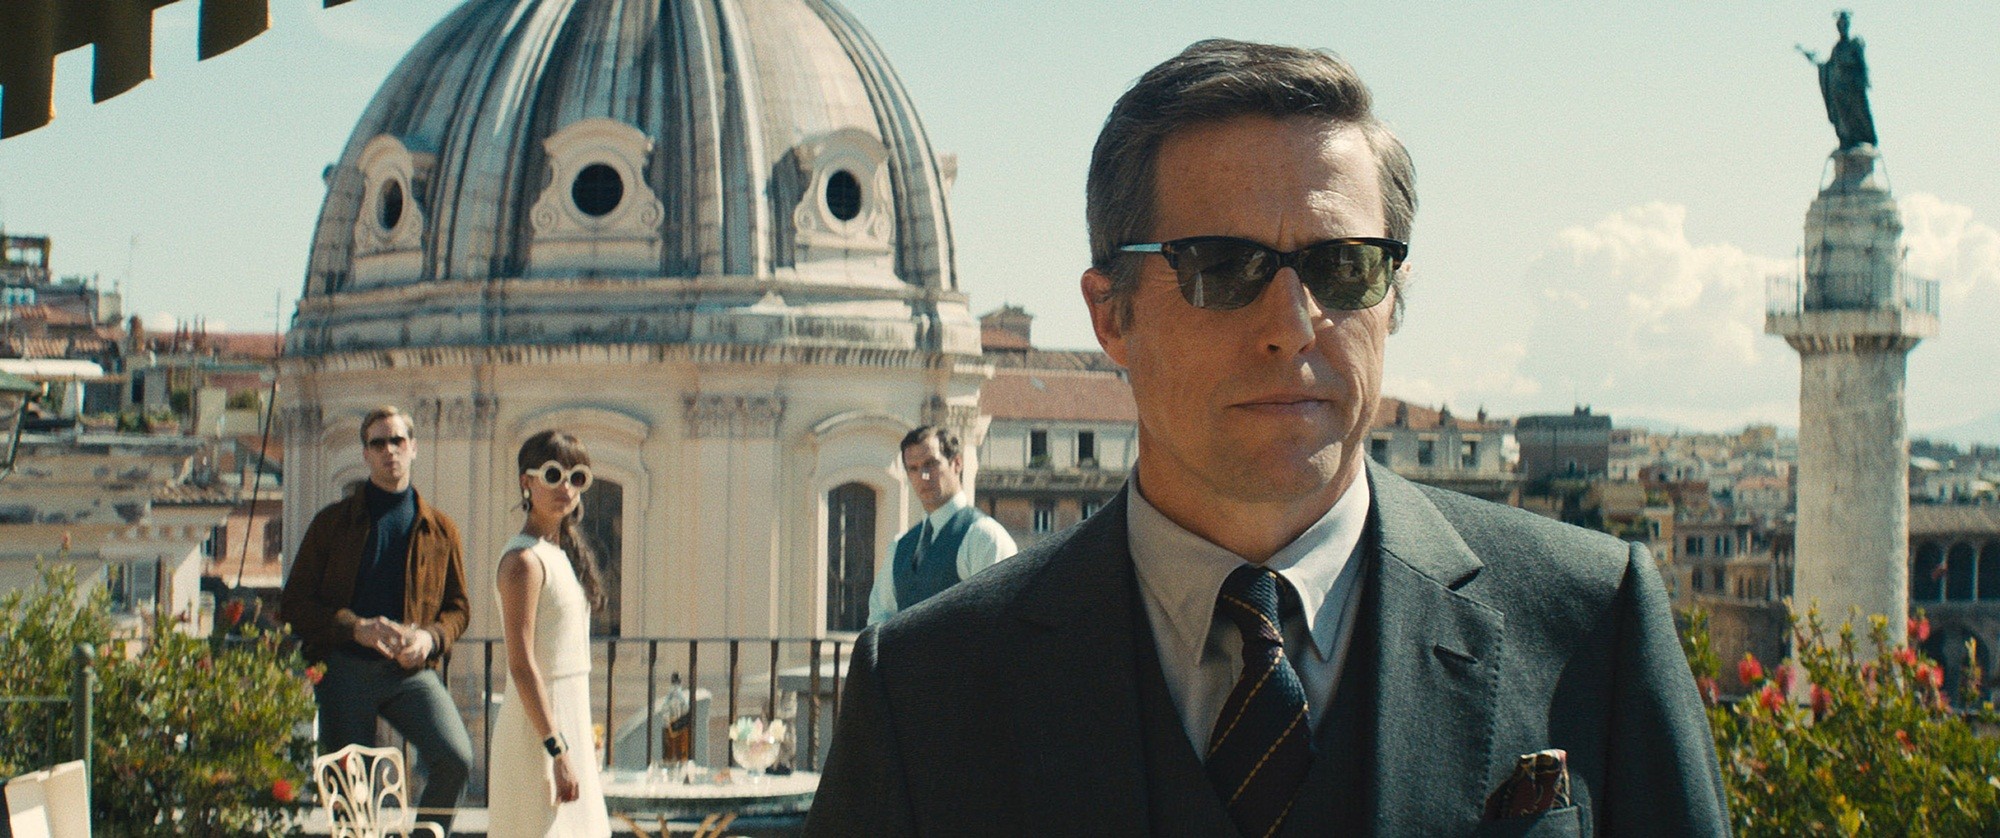 Hugh Grant stars as Waverly in Warner Bros. Pictures' The Man from U.N.C.L.E. (2015)